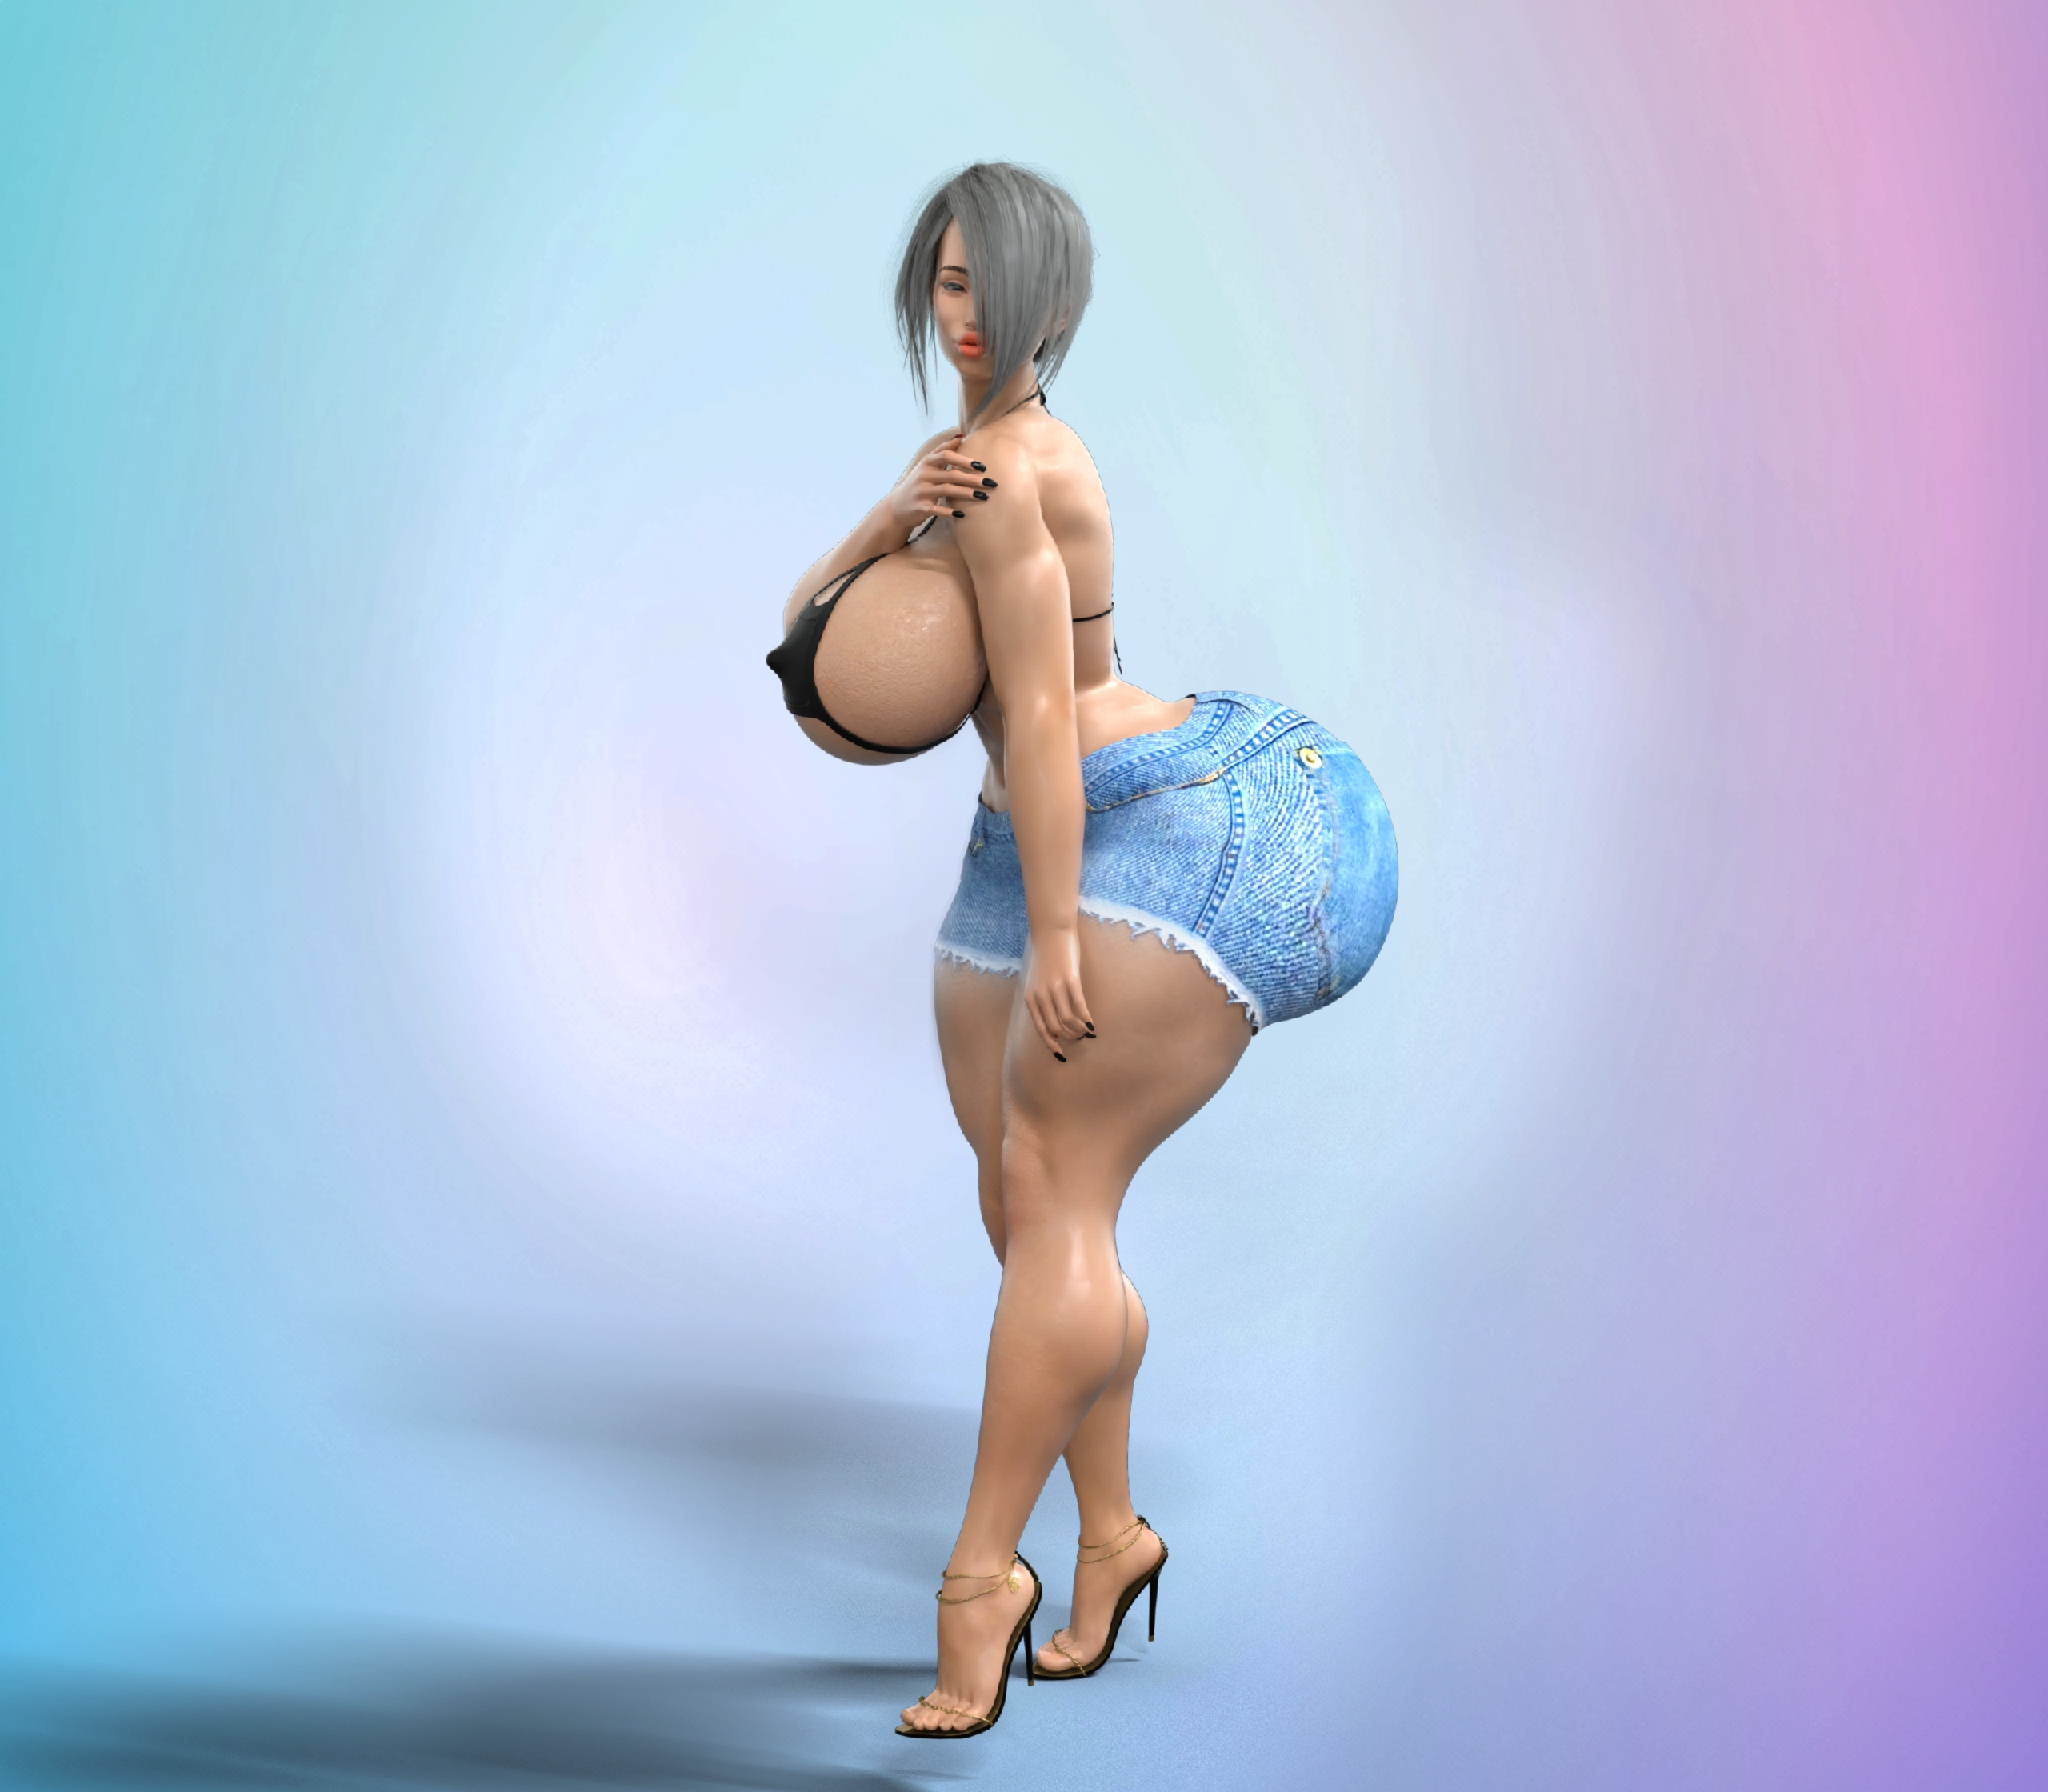 MOMMY PHOTOSHOOT Prison House Big Tits Big Ass Mom 3d Porn Thicc Thick Thighs Bimbo Sexy Woman Sexy Boobs Horny Face Nsfw 3d Girl 4